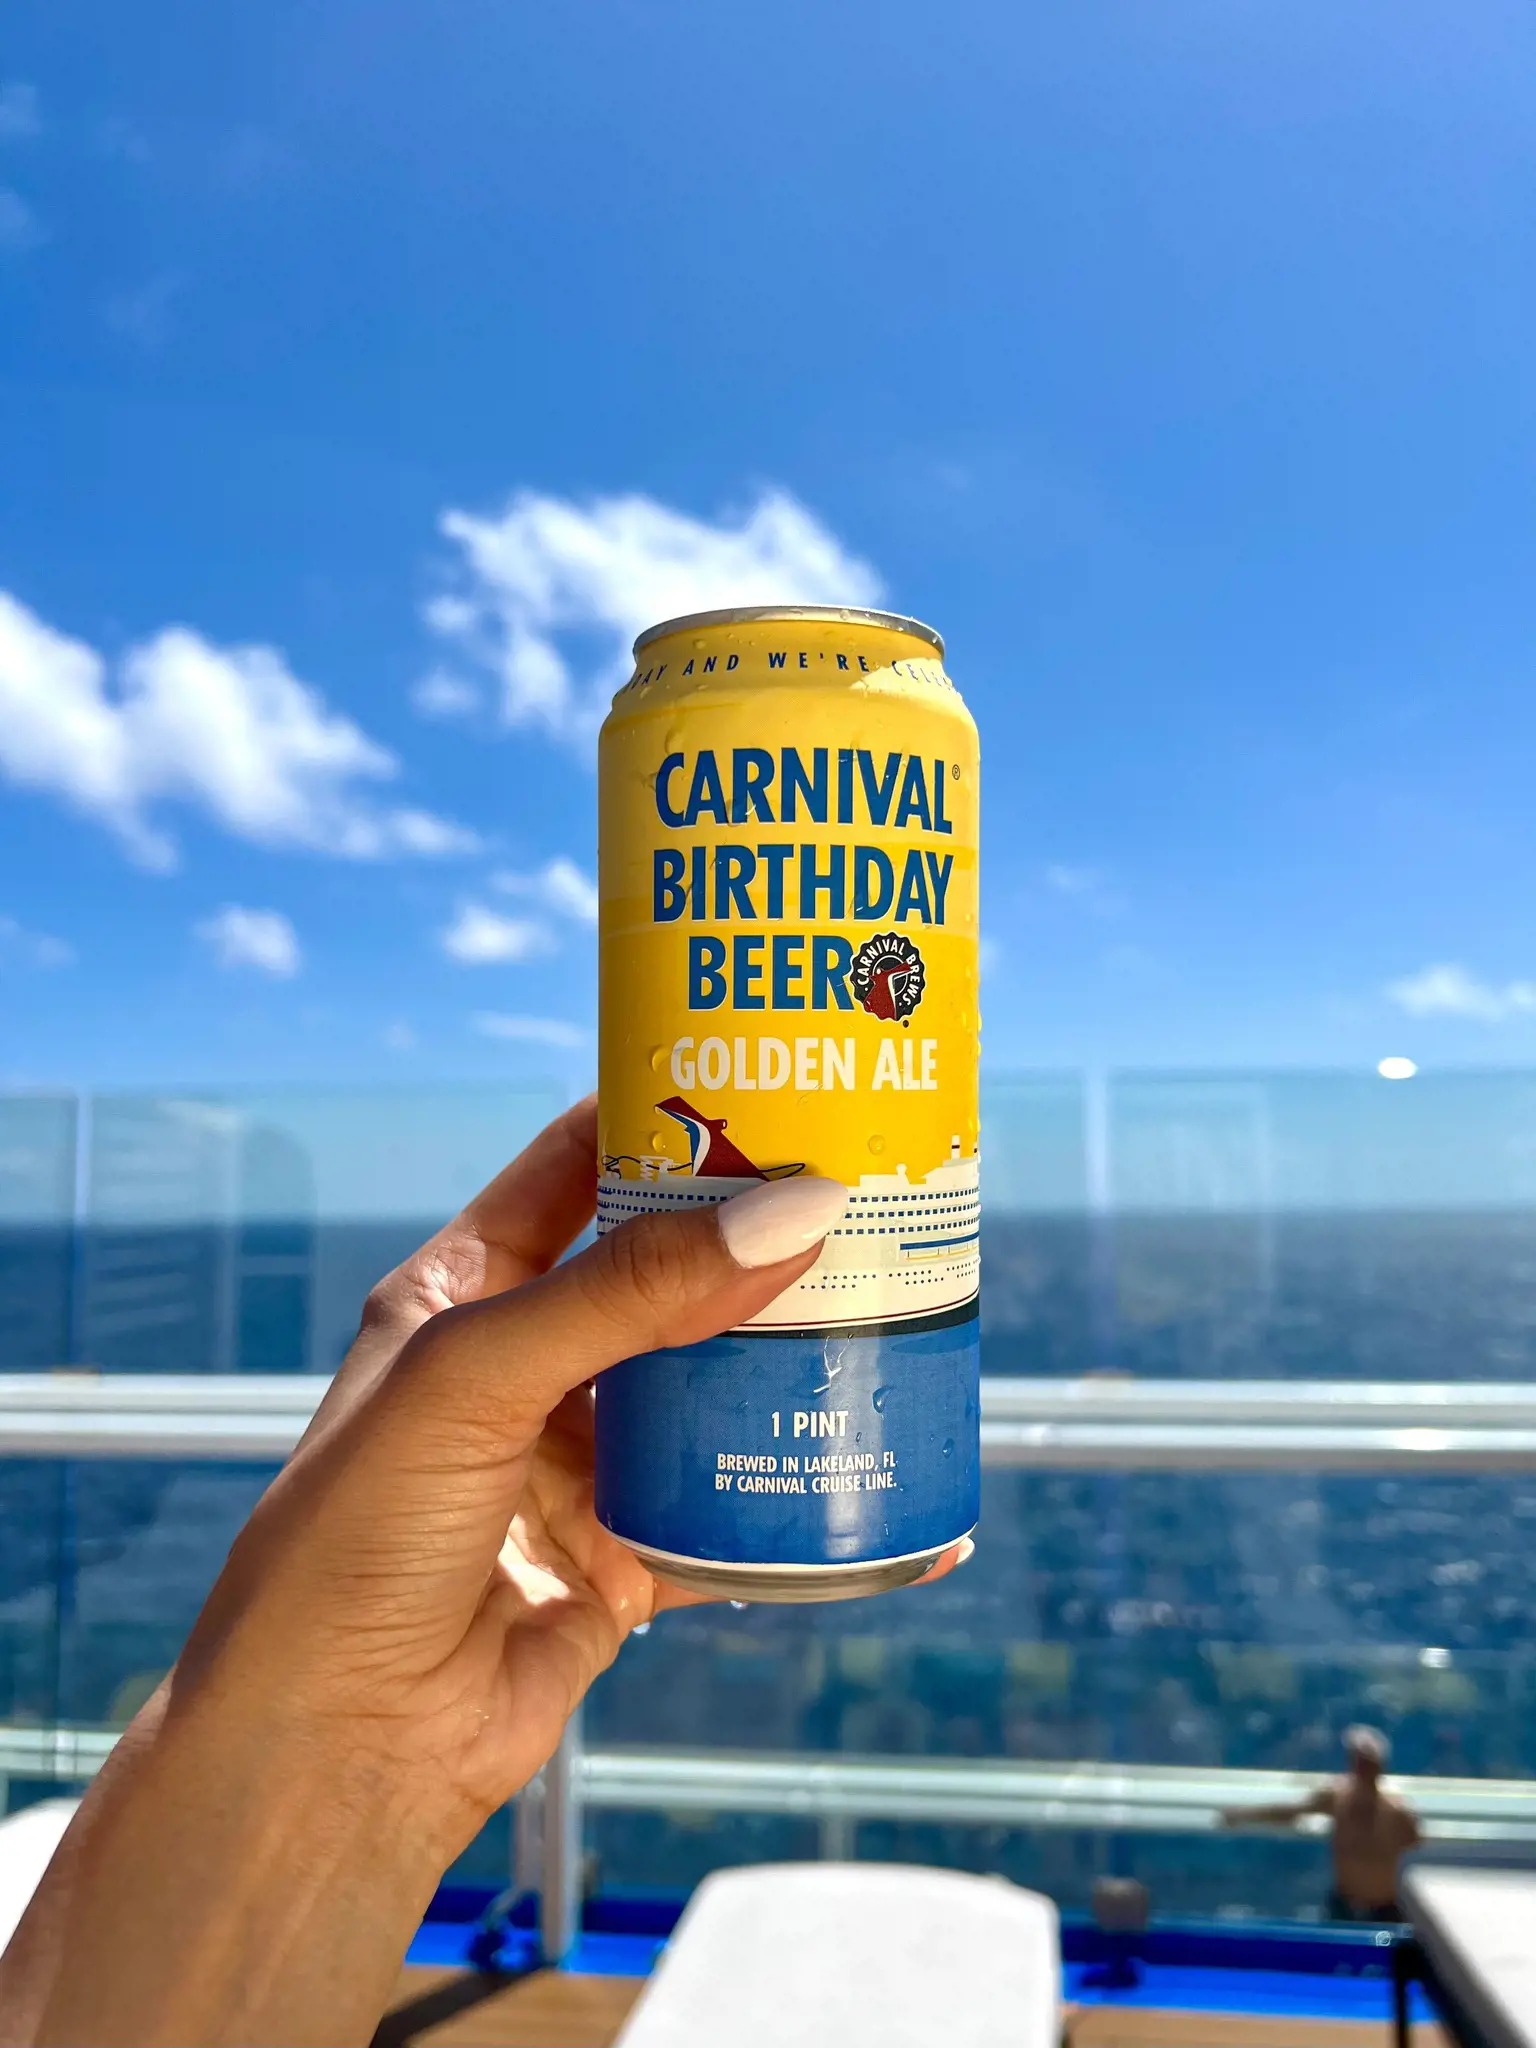 To mark 50th birthday, Carnival Cruise started doing their own brew.